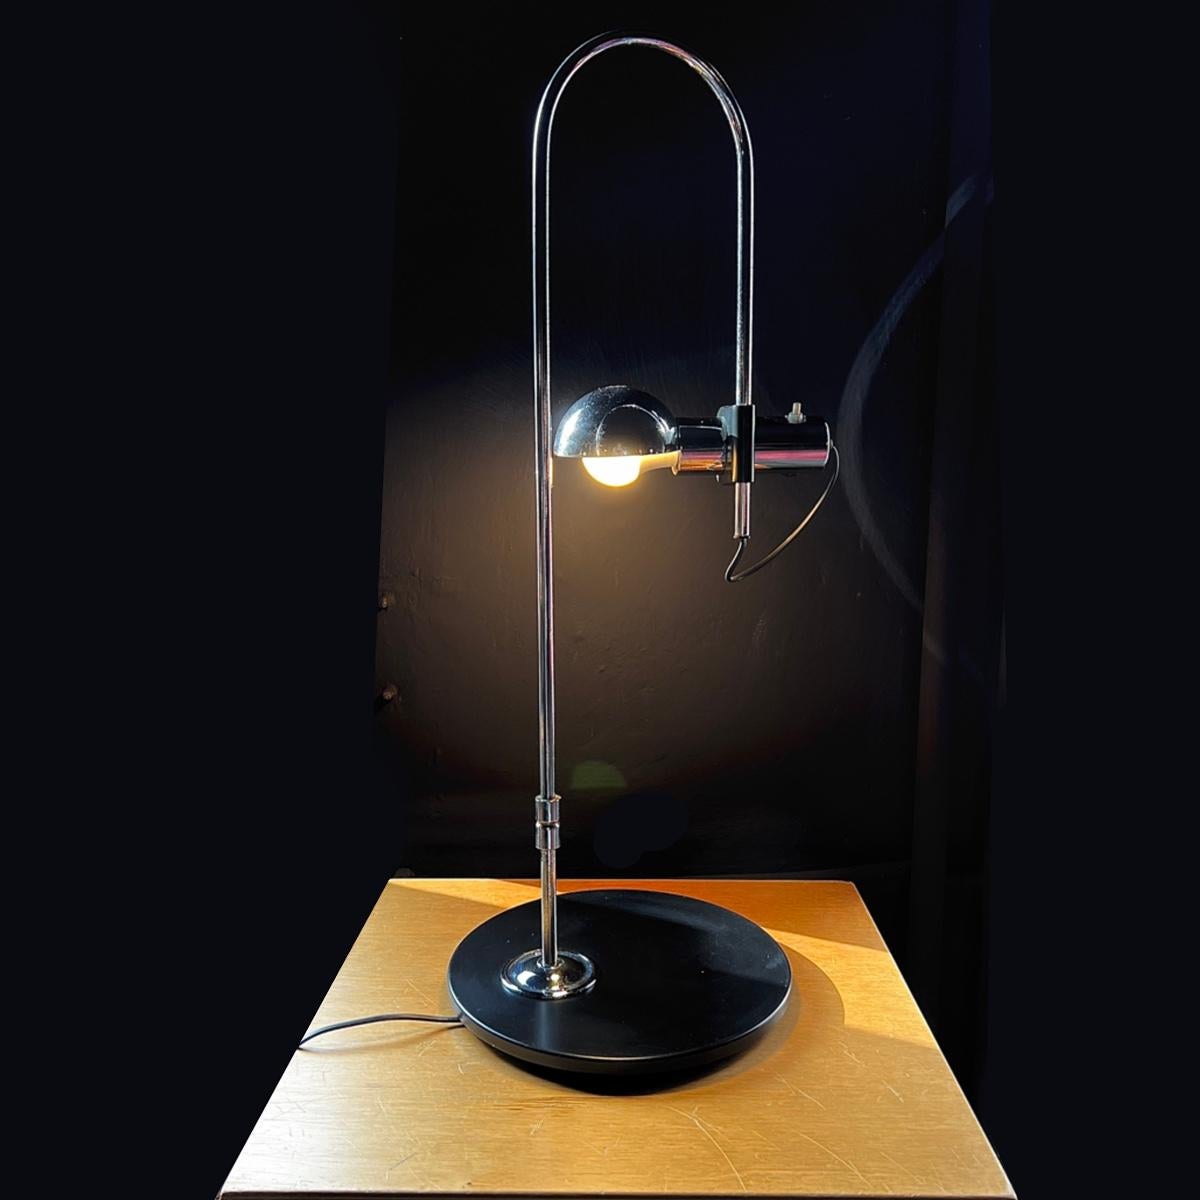 This desk lamp boasts a commanding presence, perched upon a sturdy metal base measuring 30 cm in diameter and towering at a remarkable height of 74 cm. Its impressive stature is matched only by its versatility; the head of the lamp can effortlessly